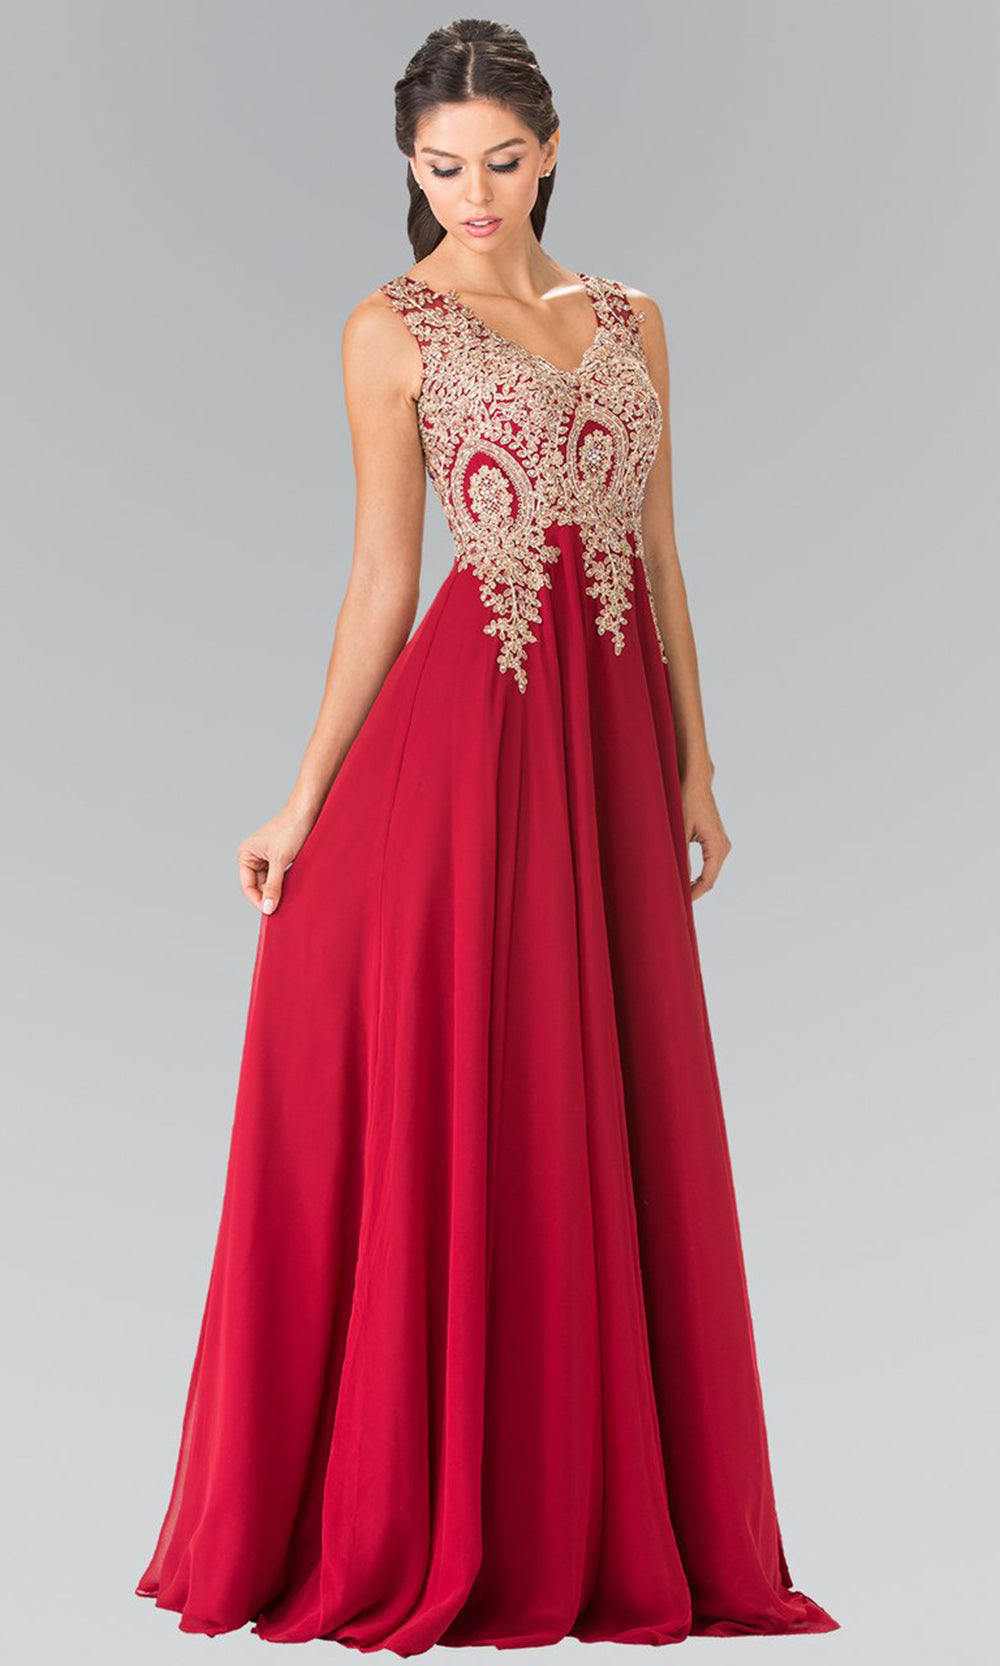 Elizabeth K - GL2311 Intricate Lace V-Neck A-Line Gown - 1 pc Burgundy in Size XL Available CCSALE XL / Burgundy